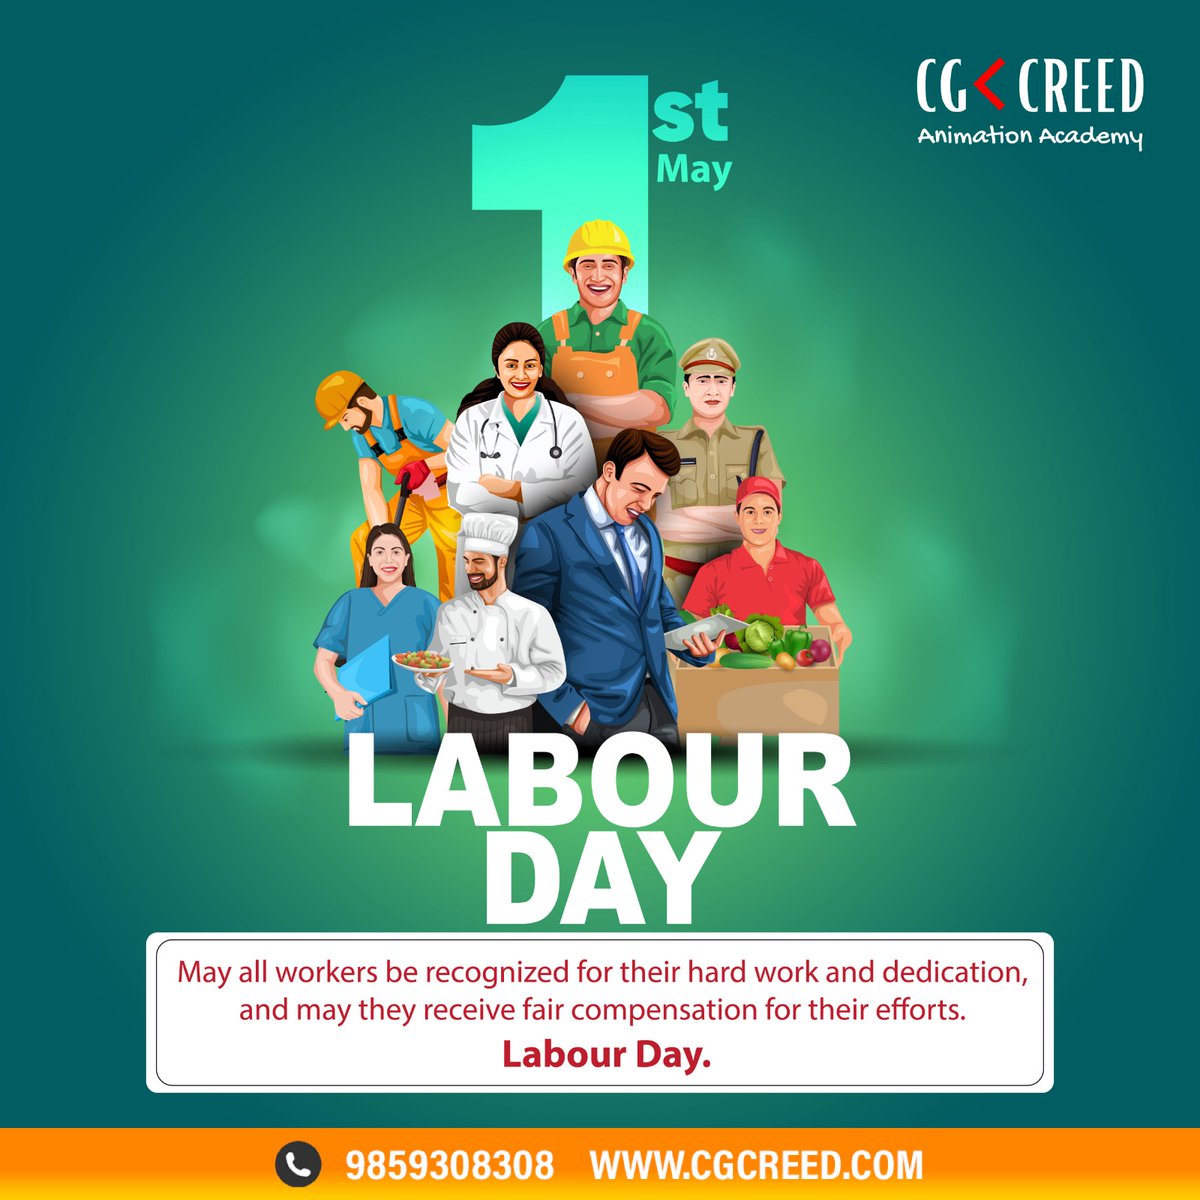 Happy Labour Day

#laborday #labordayweekend #happylaborday #labordaysale #summer #love #labor #holiday #may #labourday #mayday #cgcreed